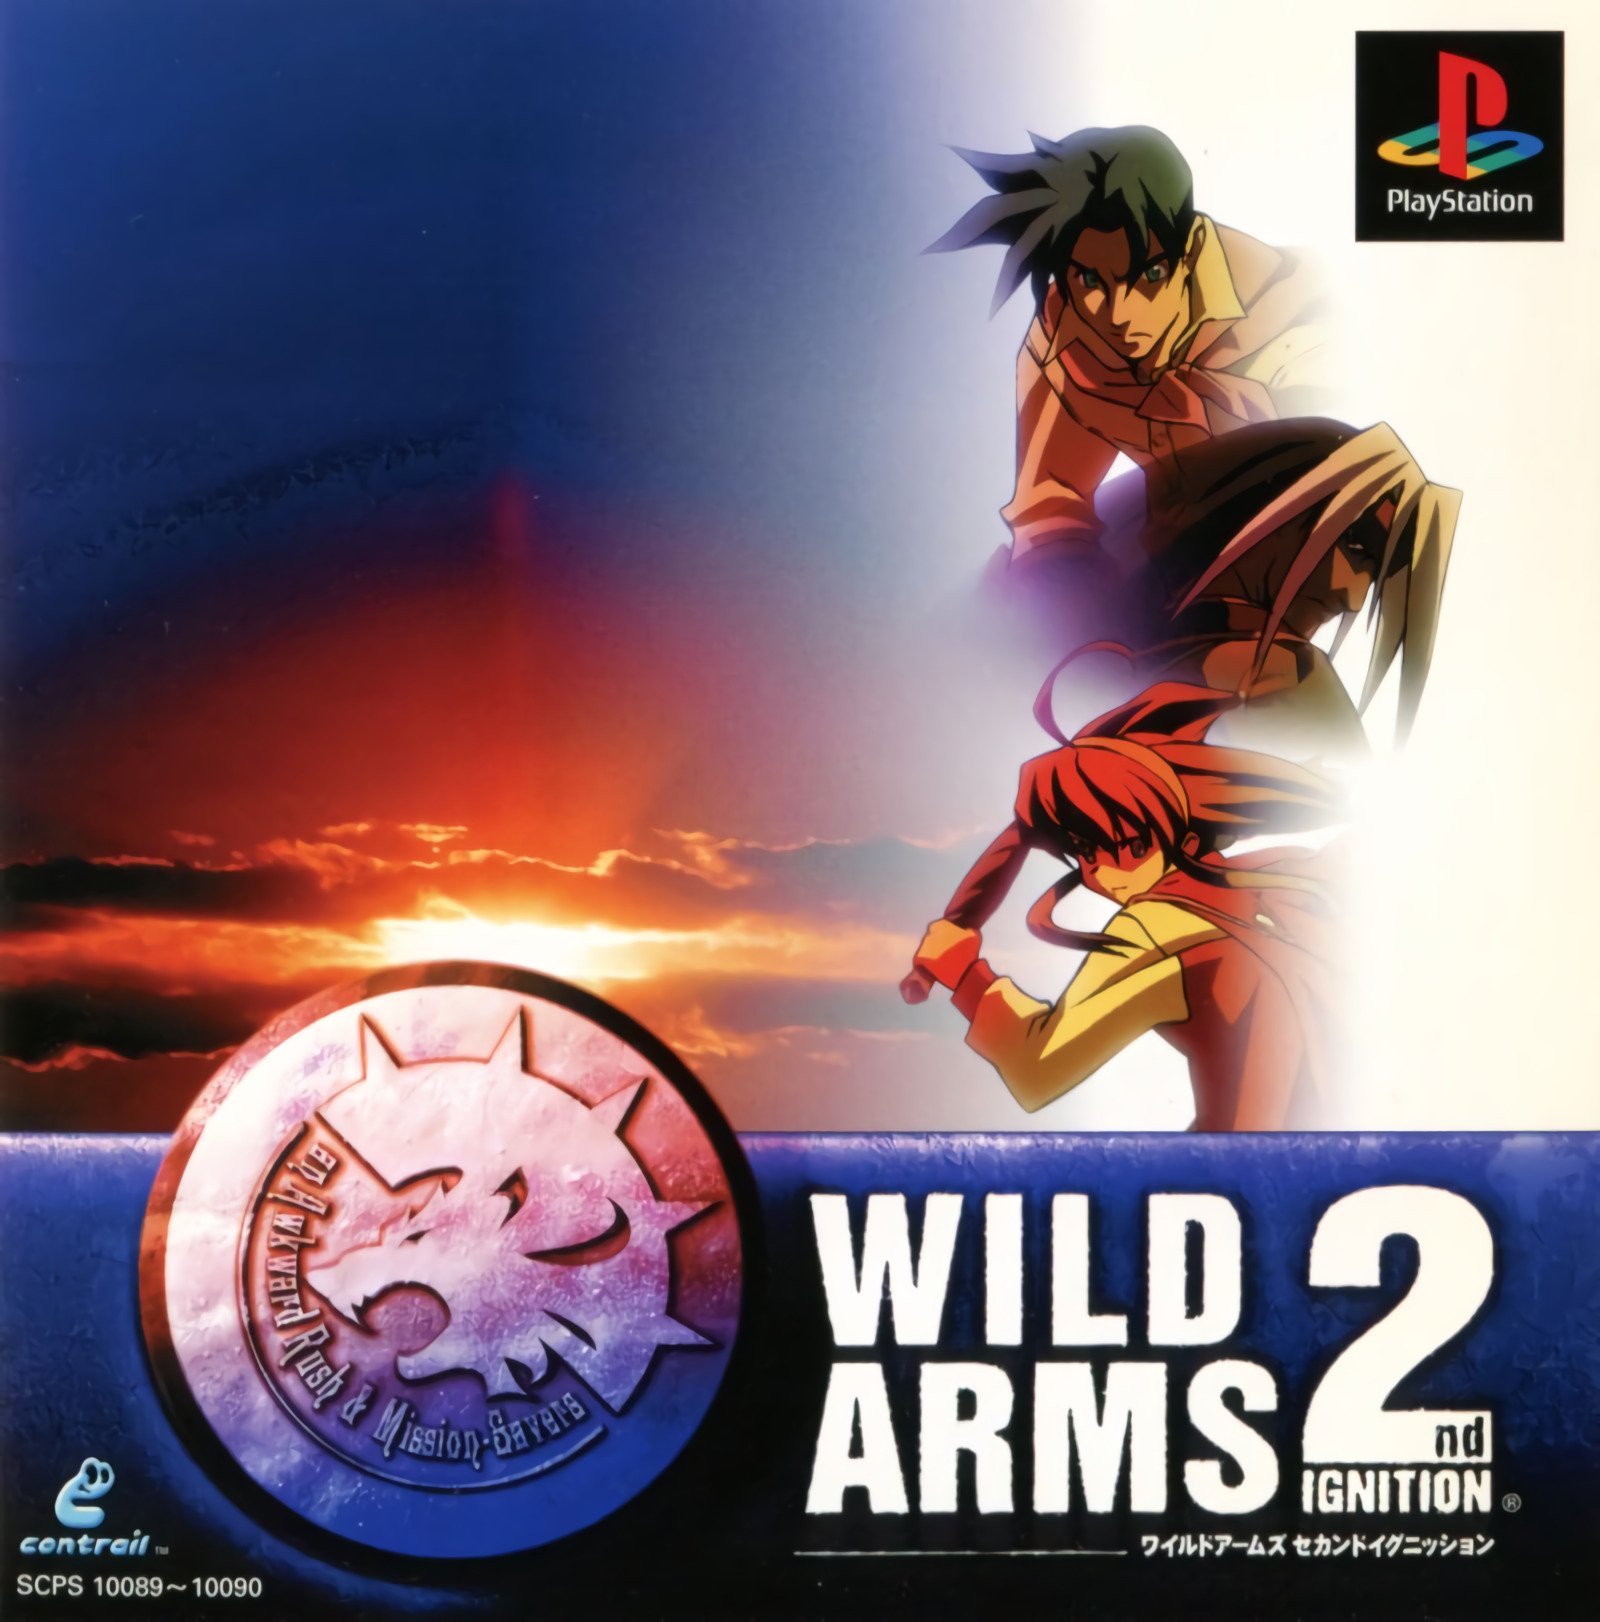 Wild Arms: 2nd Ignition